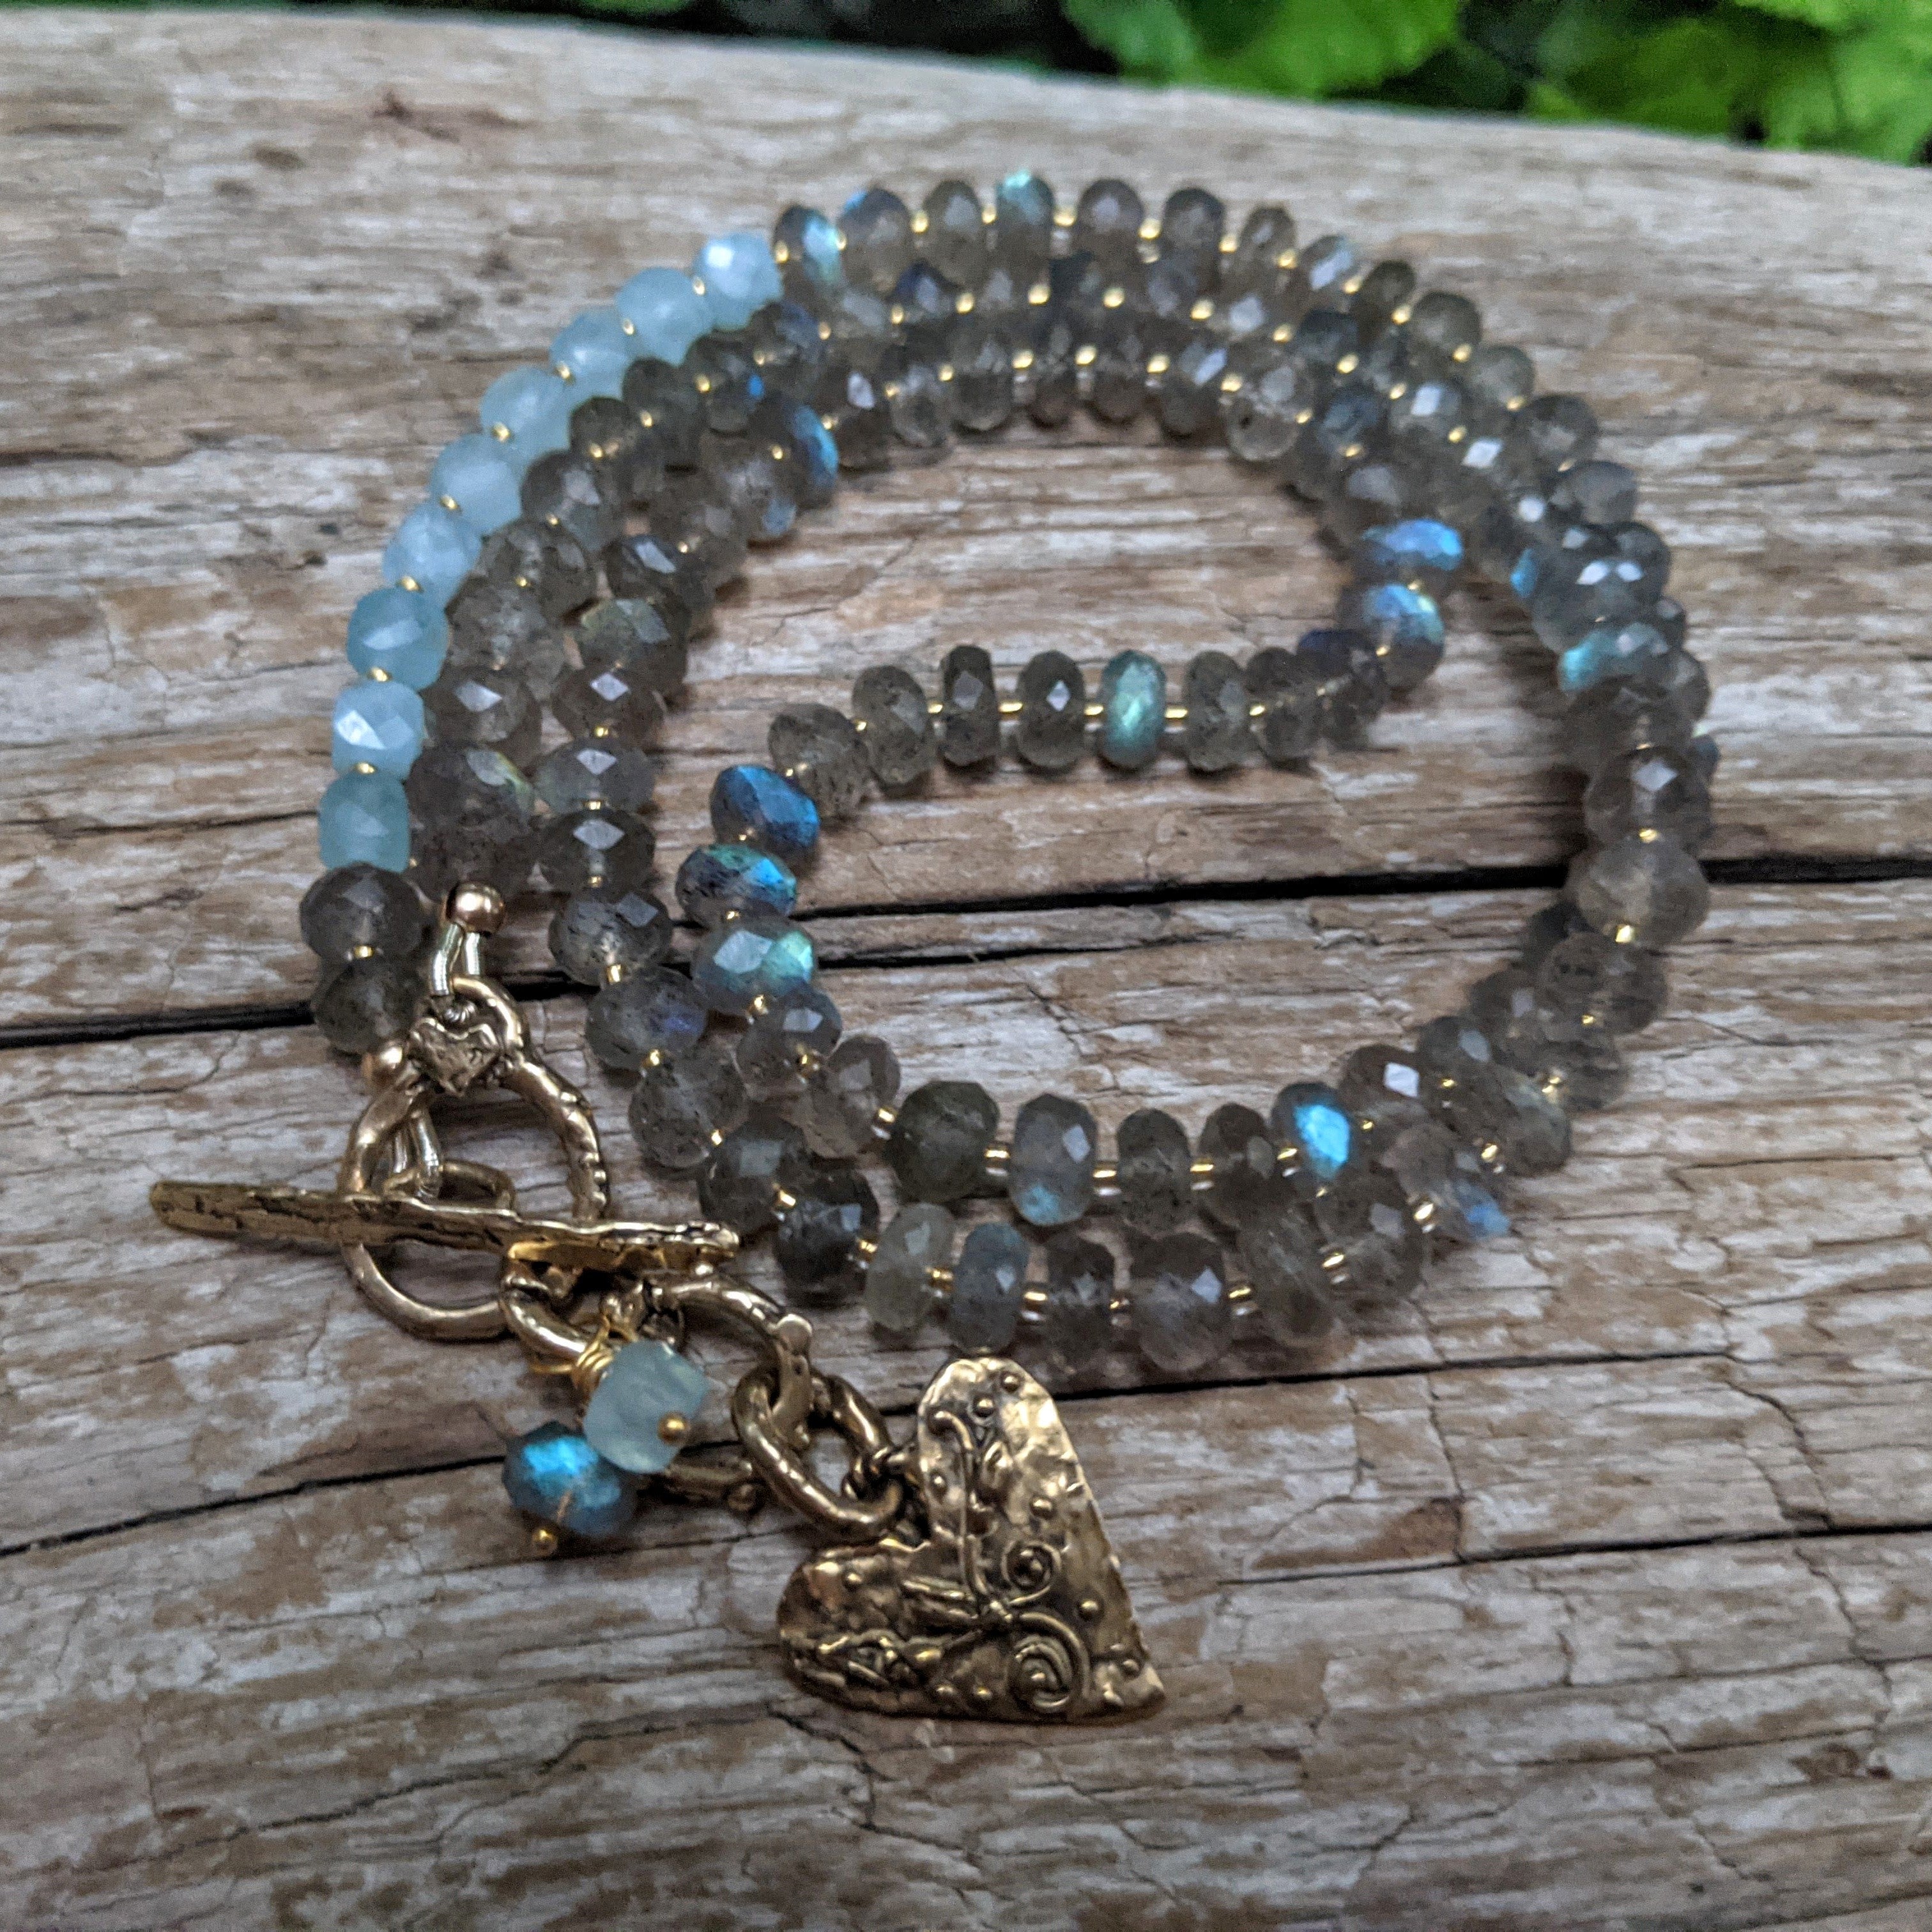 Gorgeouse top quality labradorite necklace with aquamarine. Created by Aurora Creative Jewellery. 